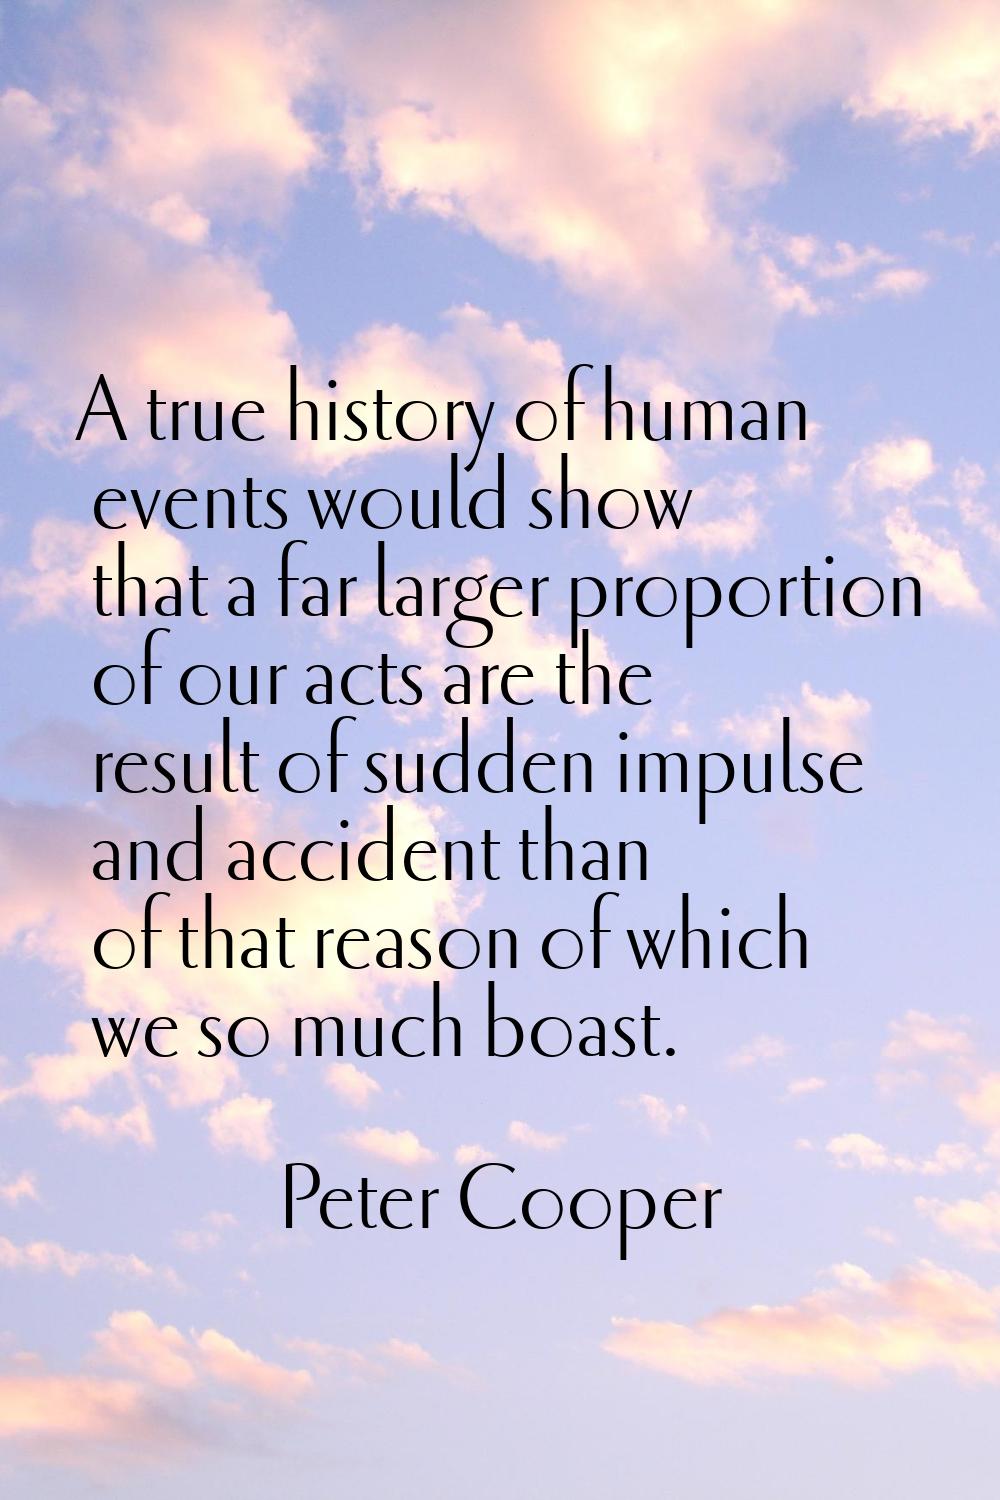 A true history of human events would show that a far larger proportion of our acts are the result o